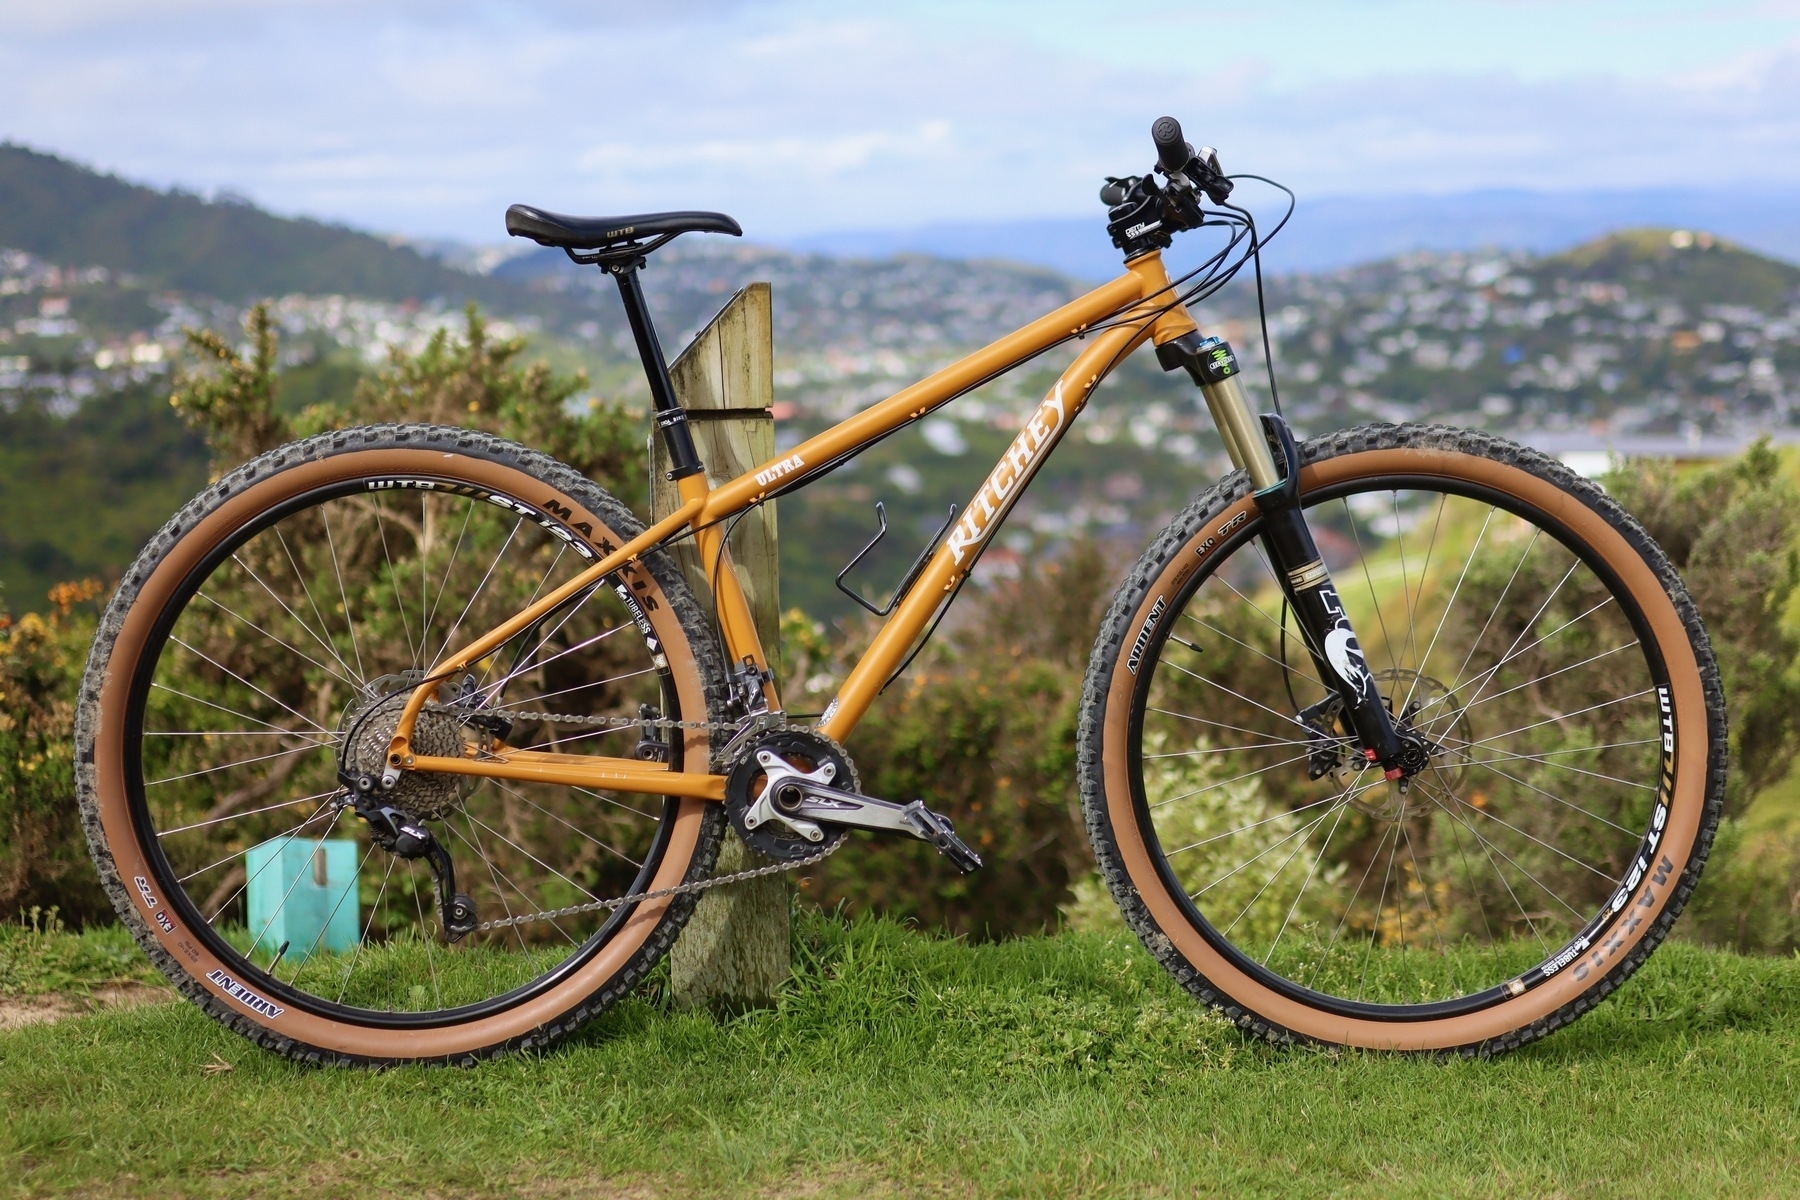 An orange Ritchey Ultra mountainbike is displayed side on, leaning on a track marker. In the background is some vegetation and in the distance some out of focus suburbs.